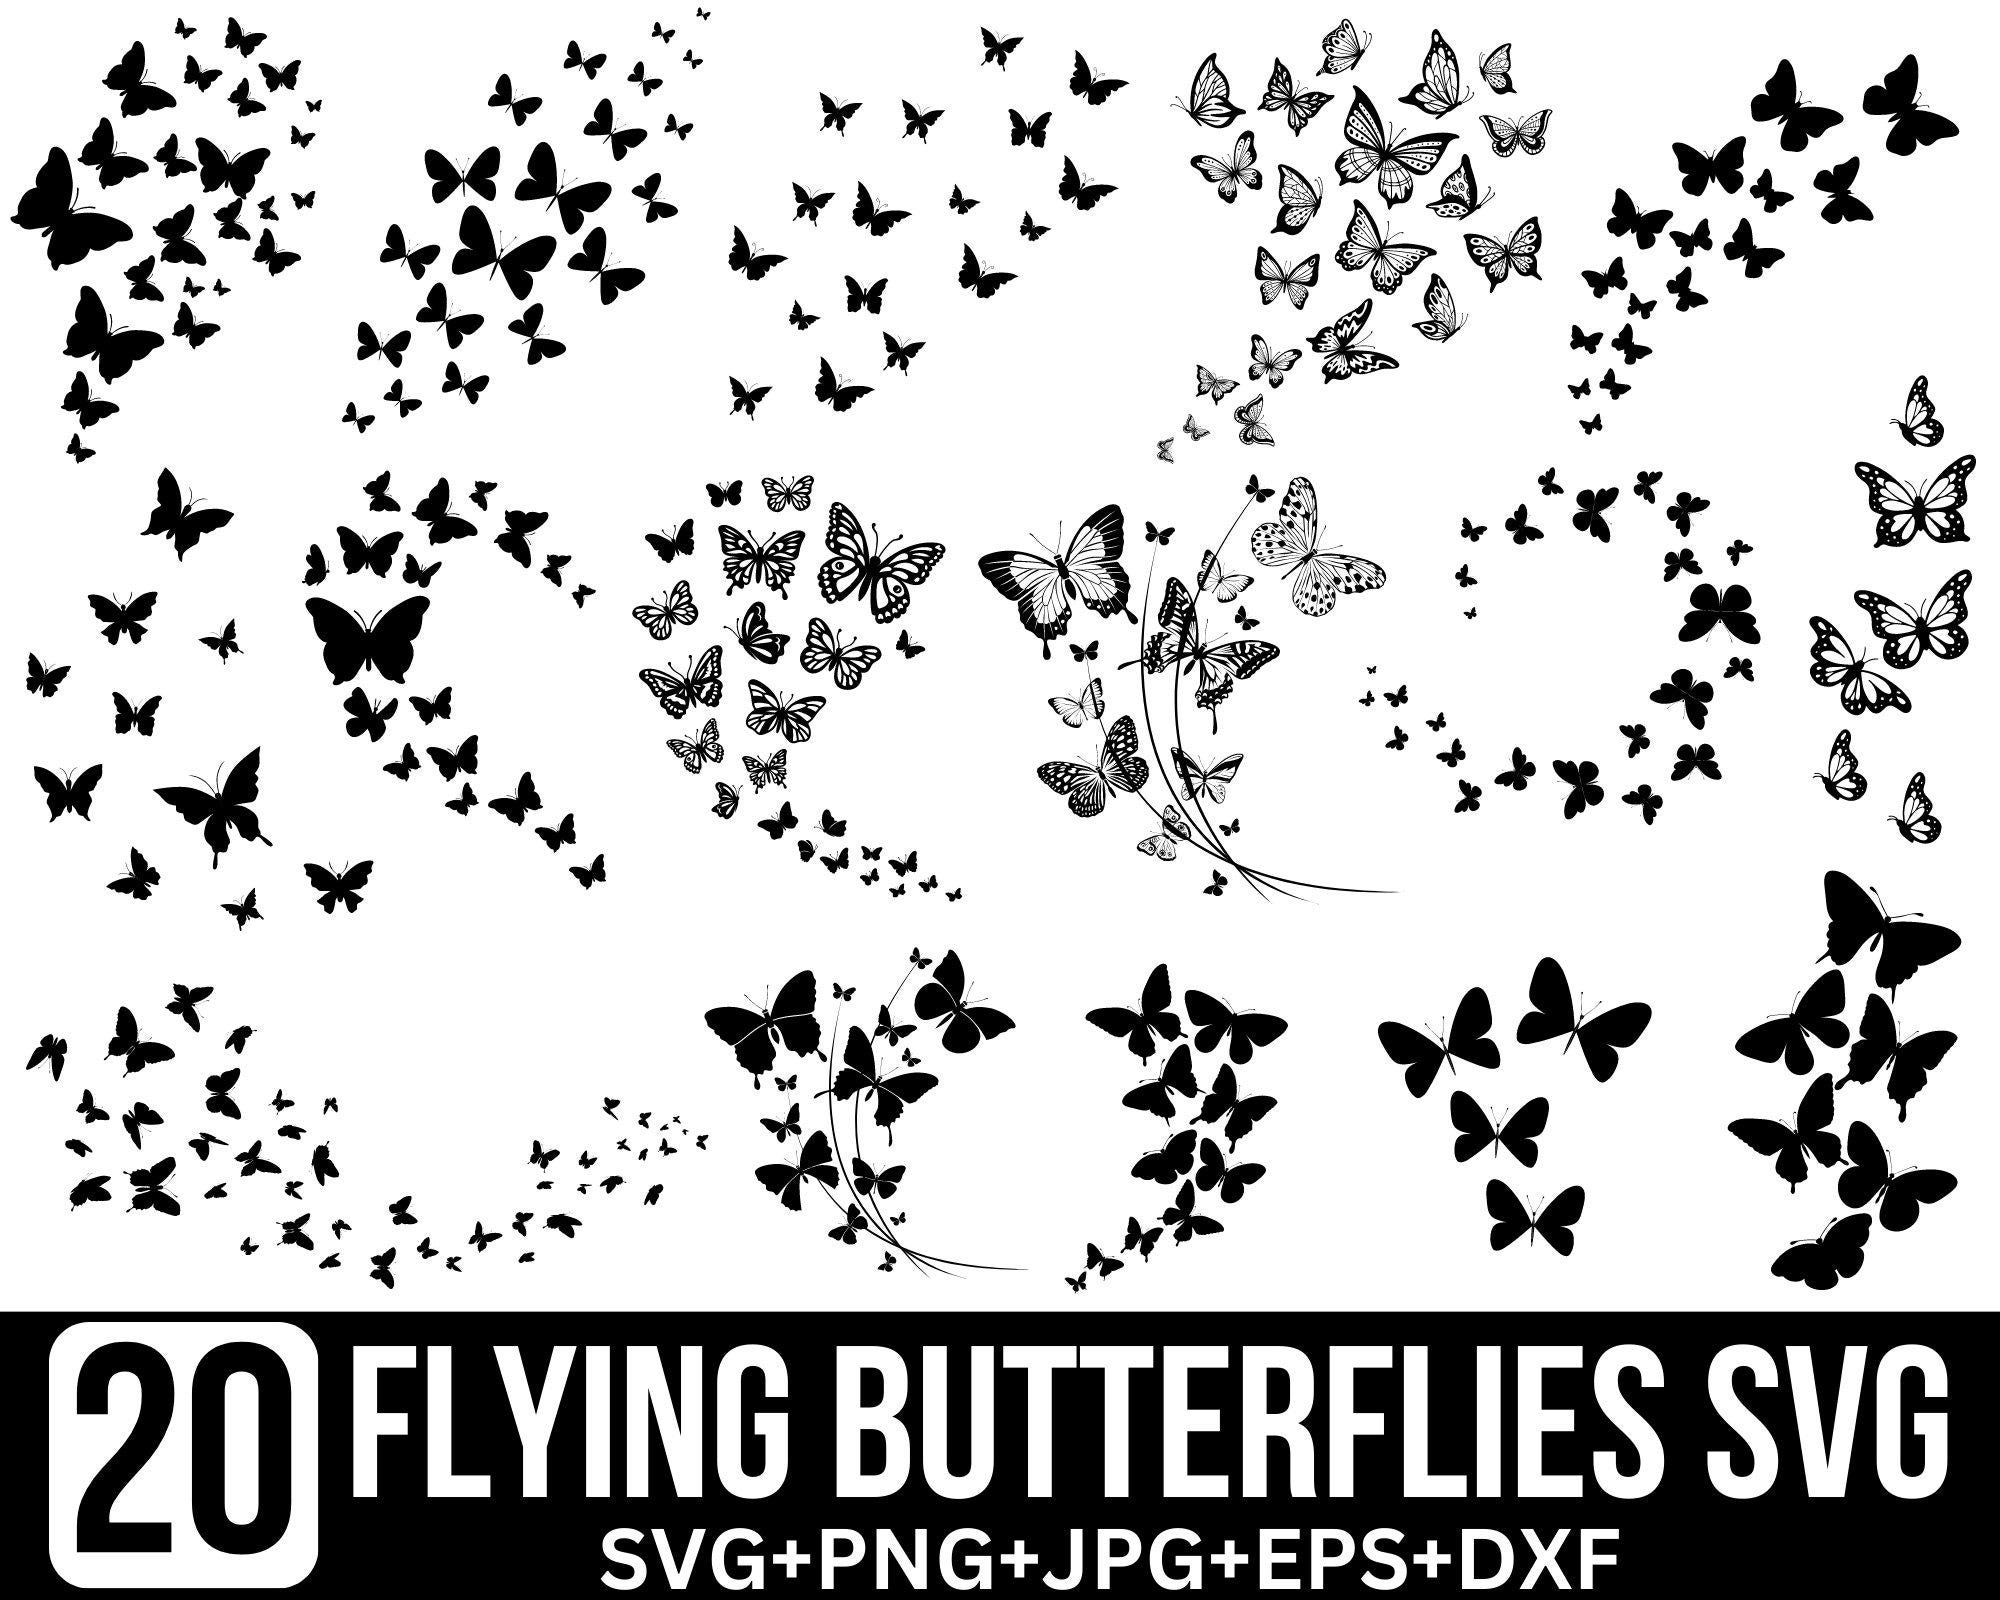 Flying Butterflies Svg bundle, Butterfly Svg, Butterfly Design Layout, Butterfly Swarm svg, Butterfly png, Cut Files For Cricut, Silhouette